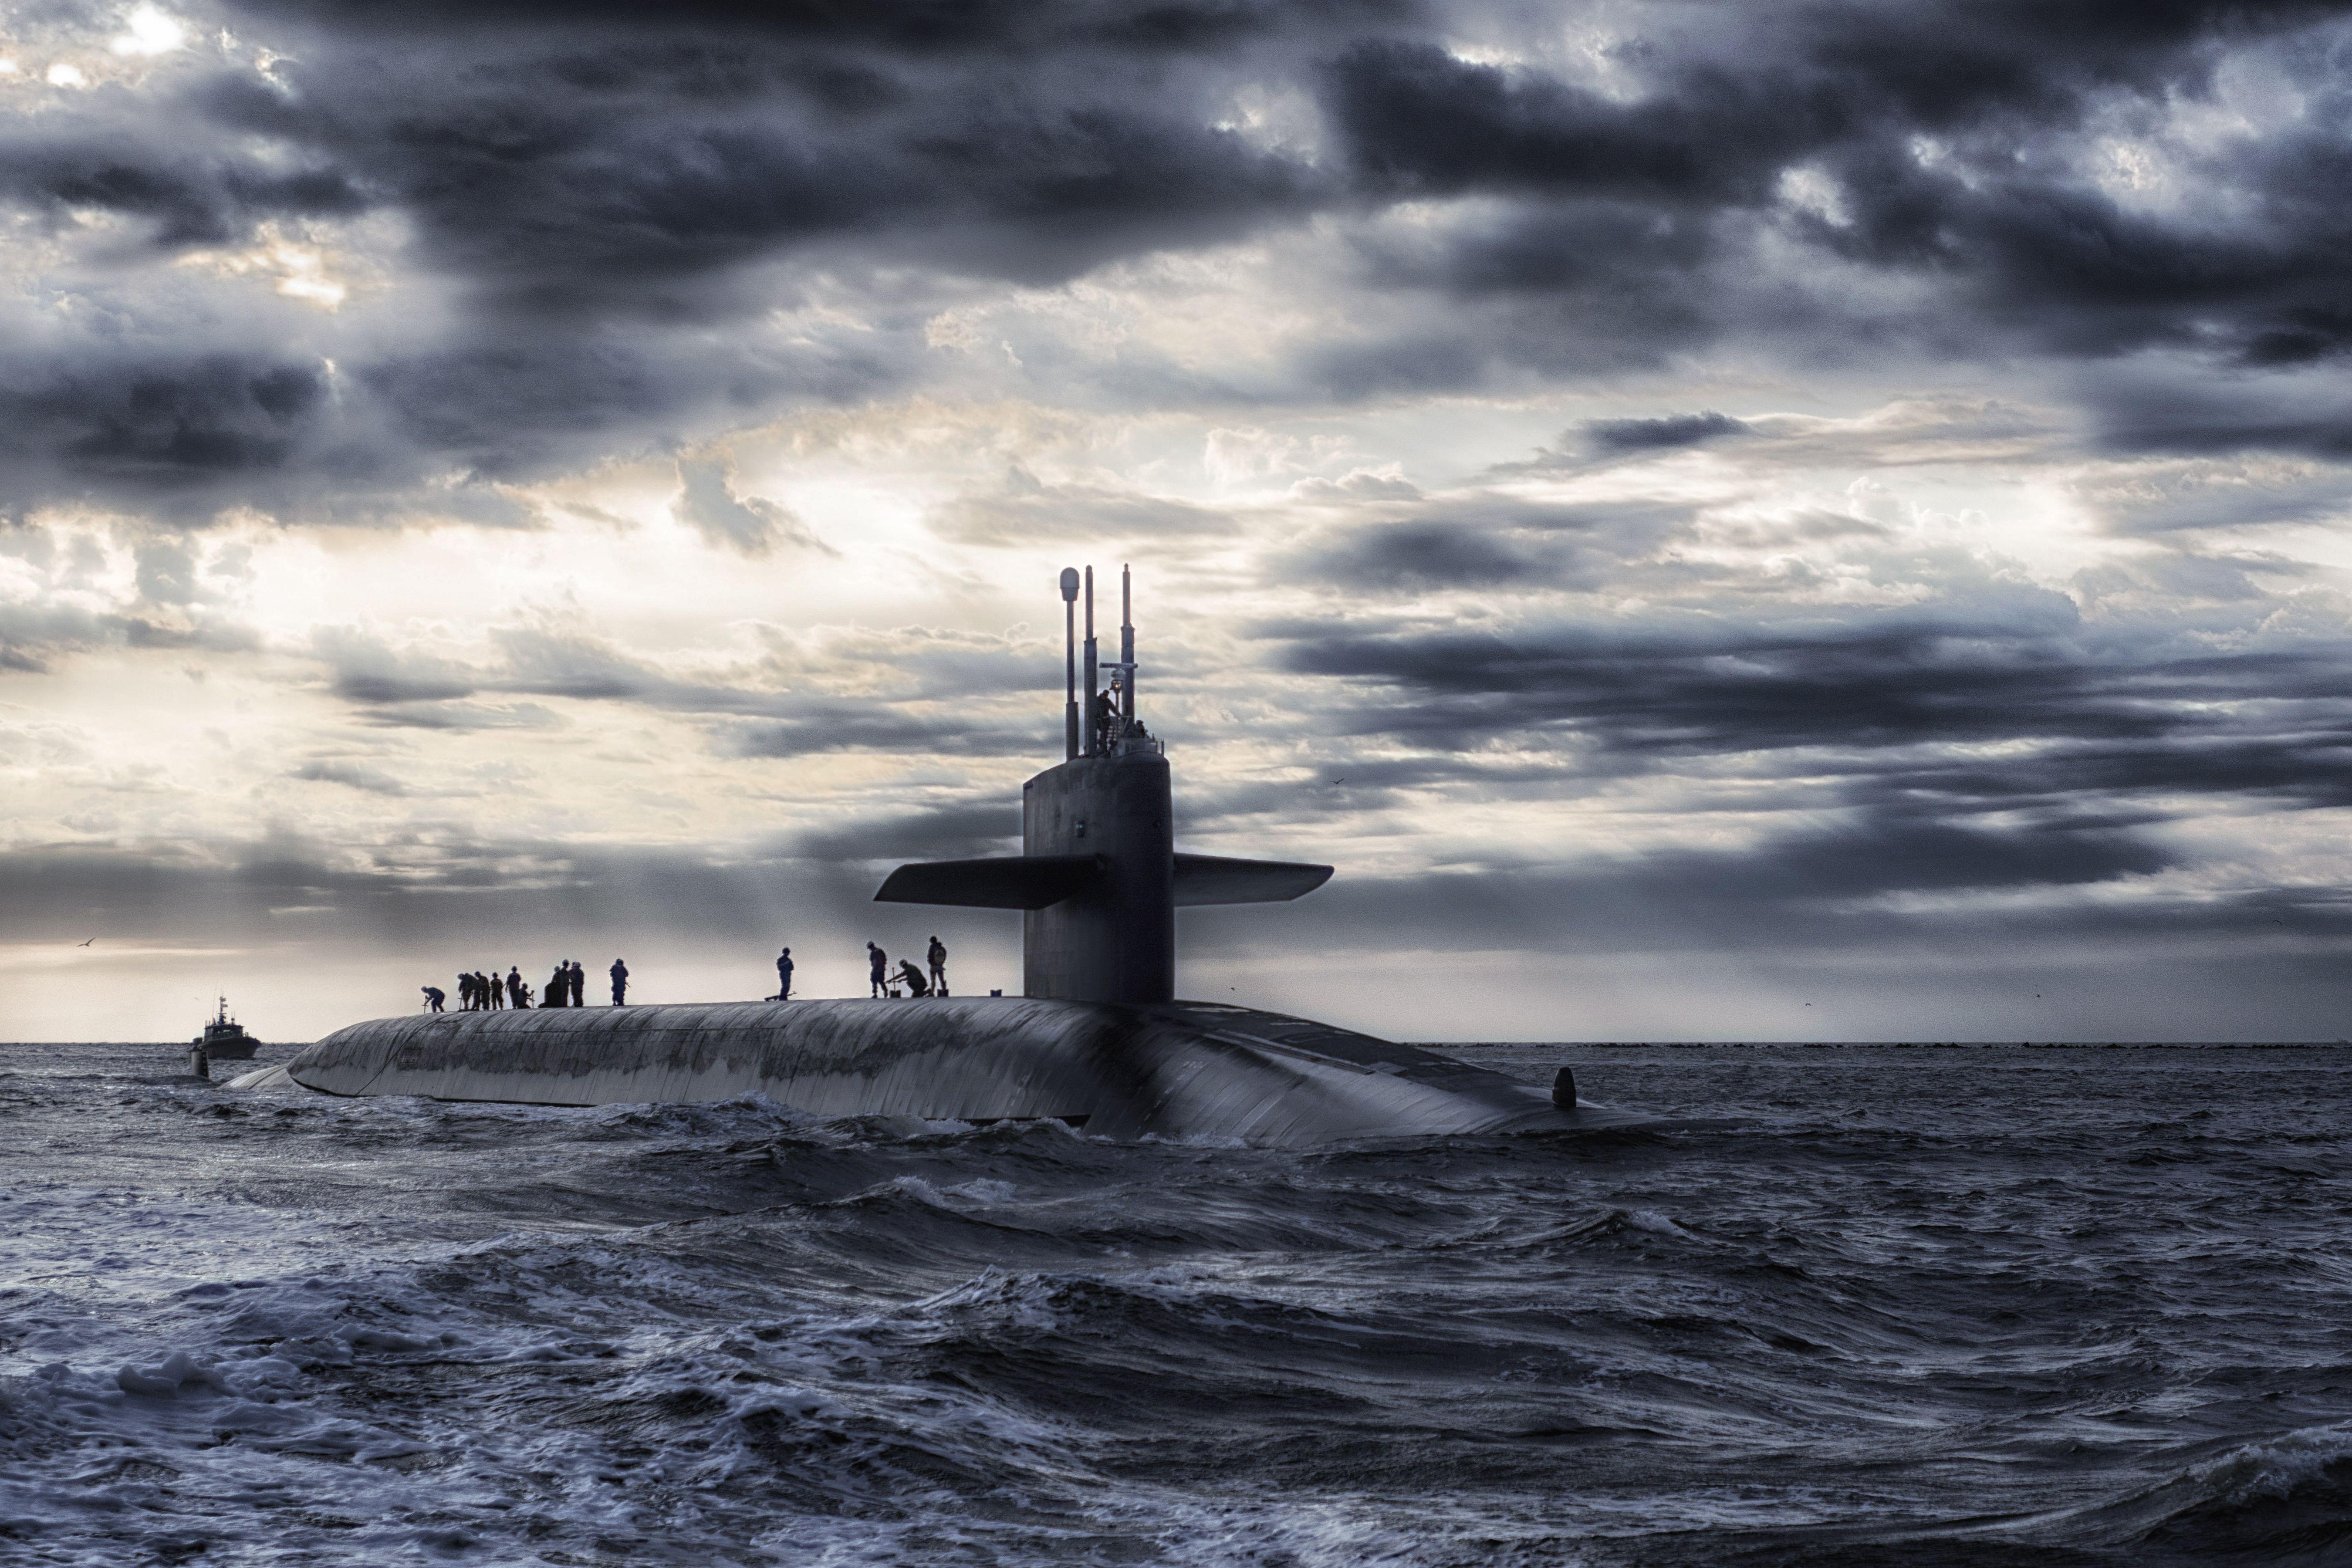 Submarine on the surface of the ocean 5K UHD Wallpaper